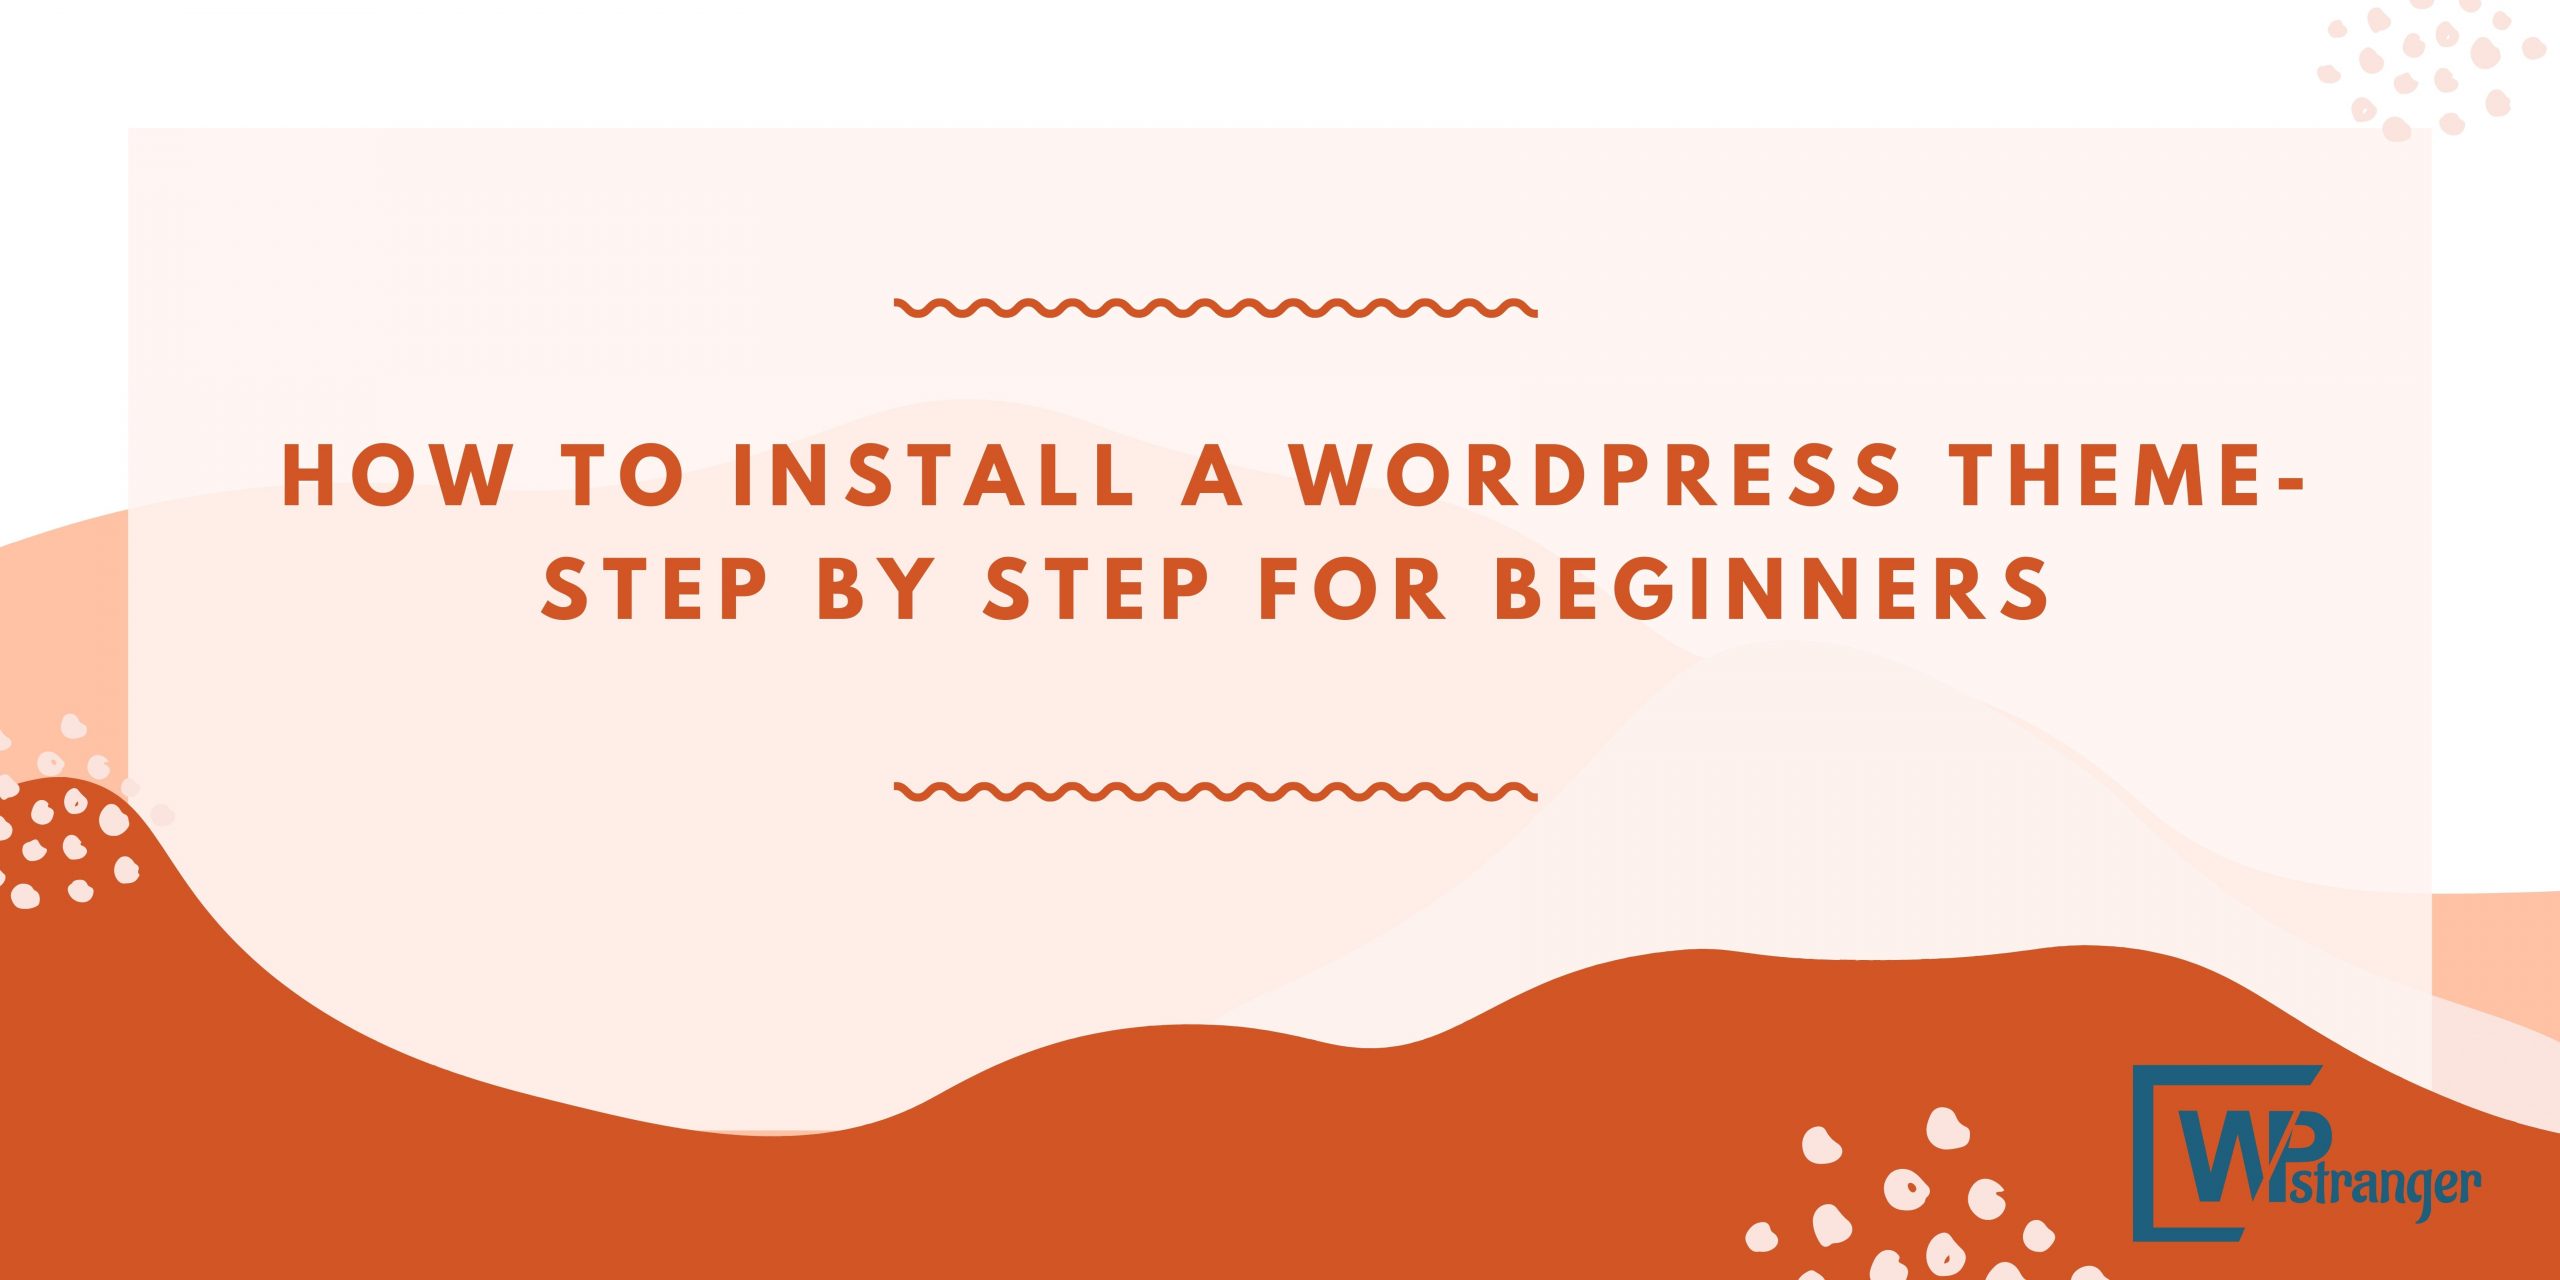 You are currently viewing How to Install a WordPress Theme- Step By Step for Beginners